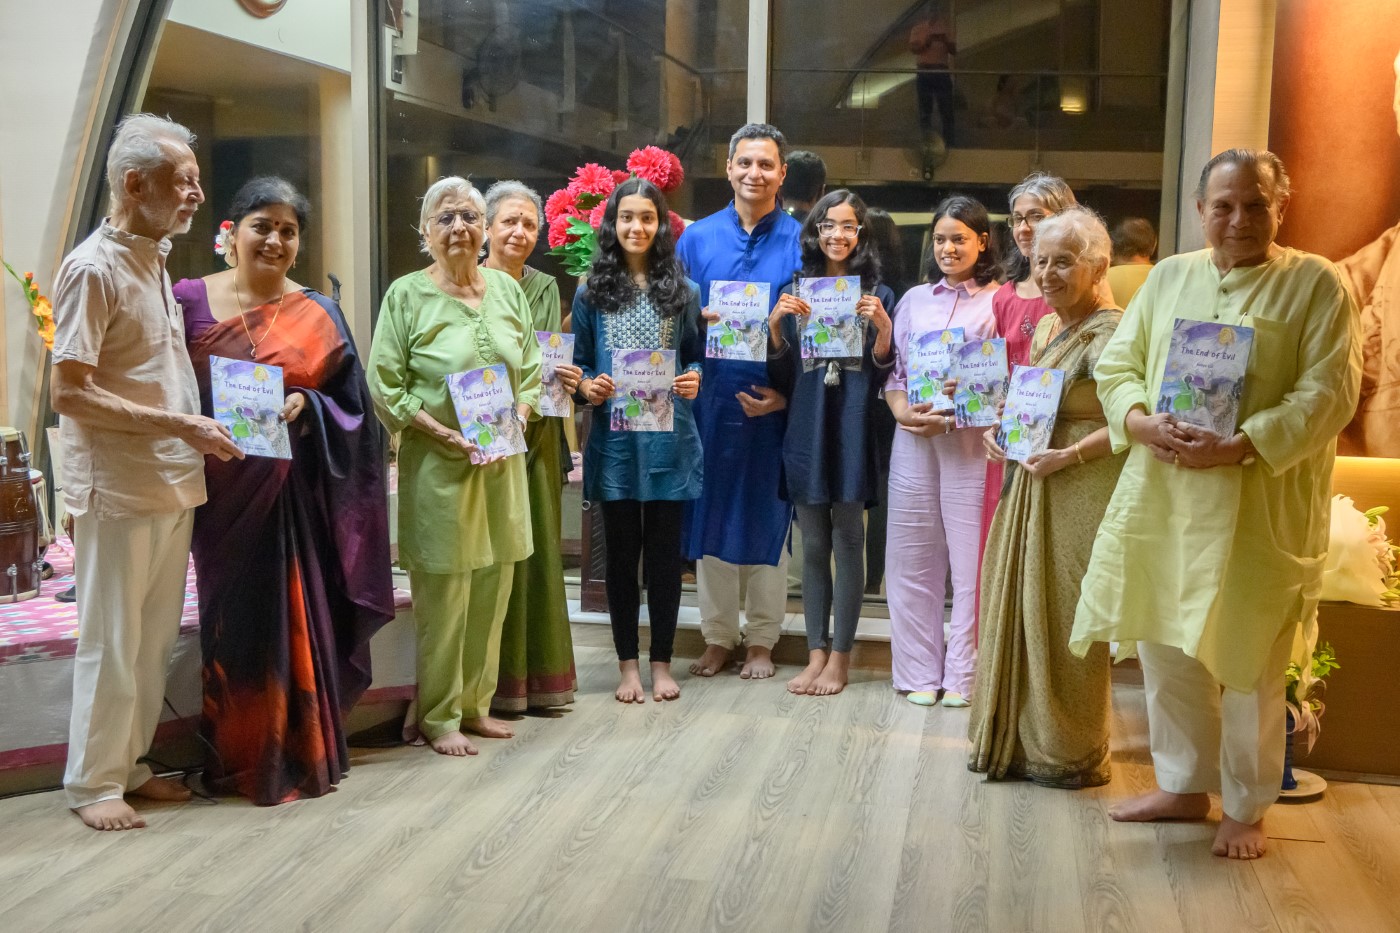 Bhajan Sandhya and release of the book, 'The End of Evil'